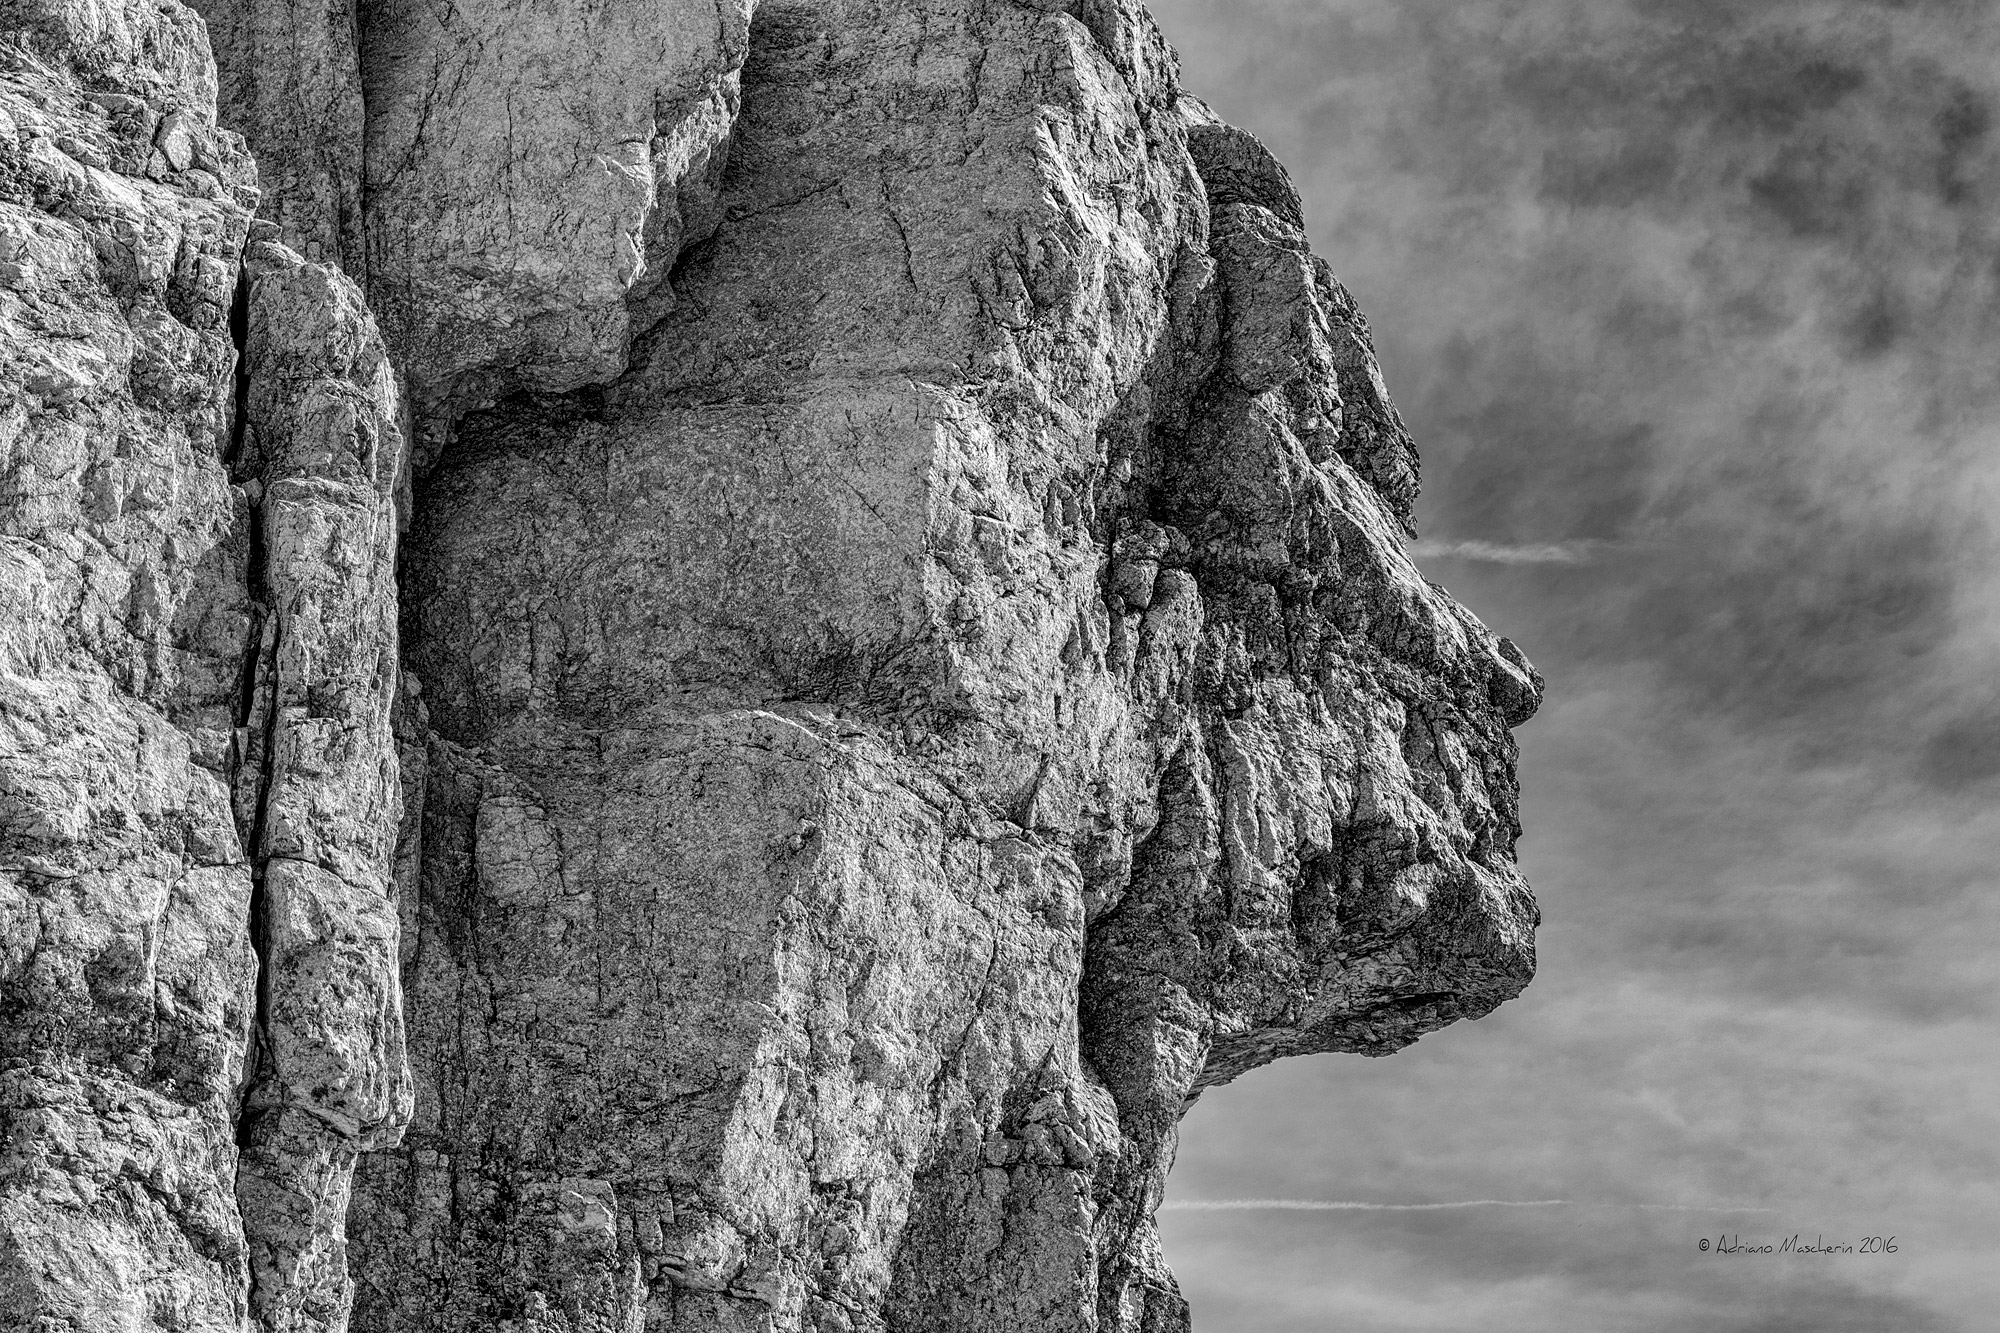 A face from the rocks ......